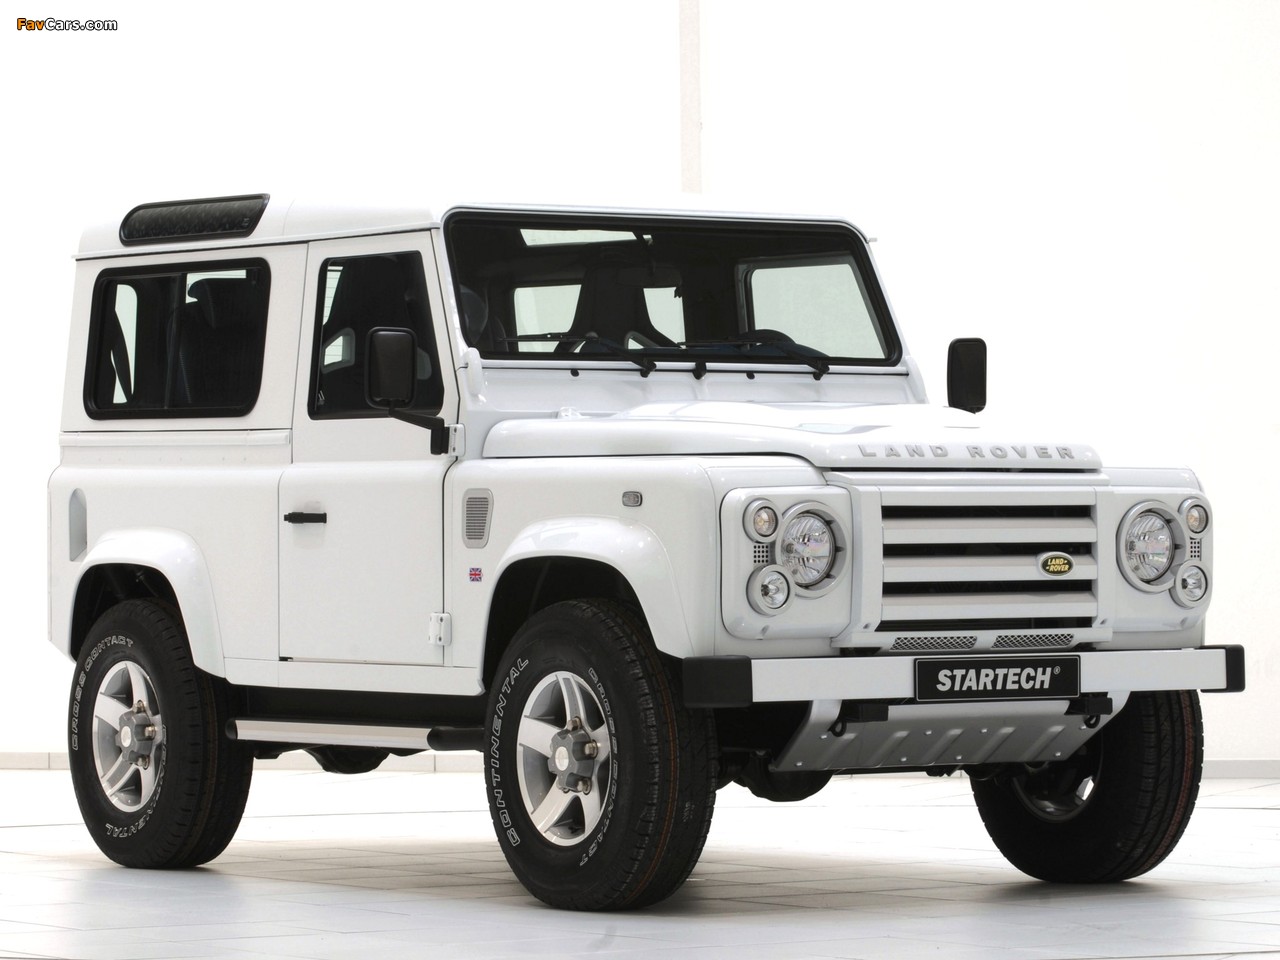 Startech Land Rover Defender 90 Yachting Edition 2010 pictures (1280 x 960)